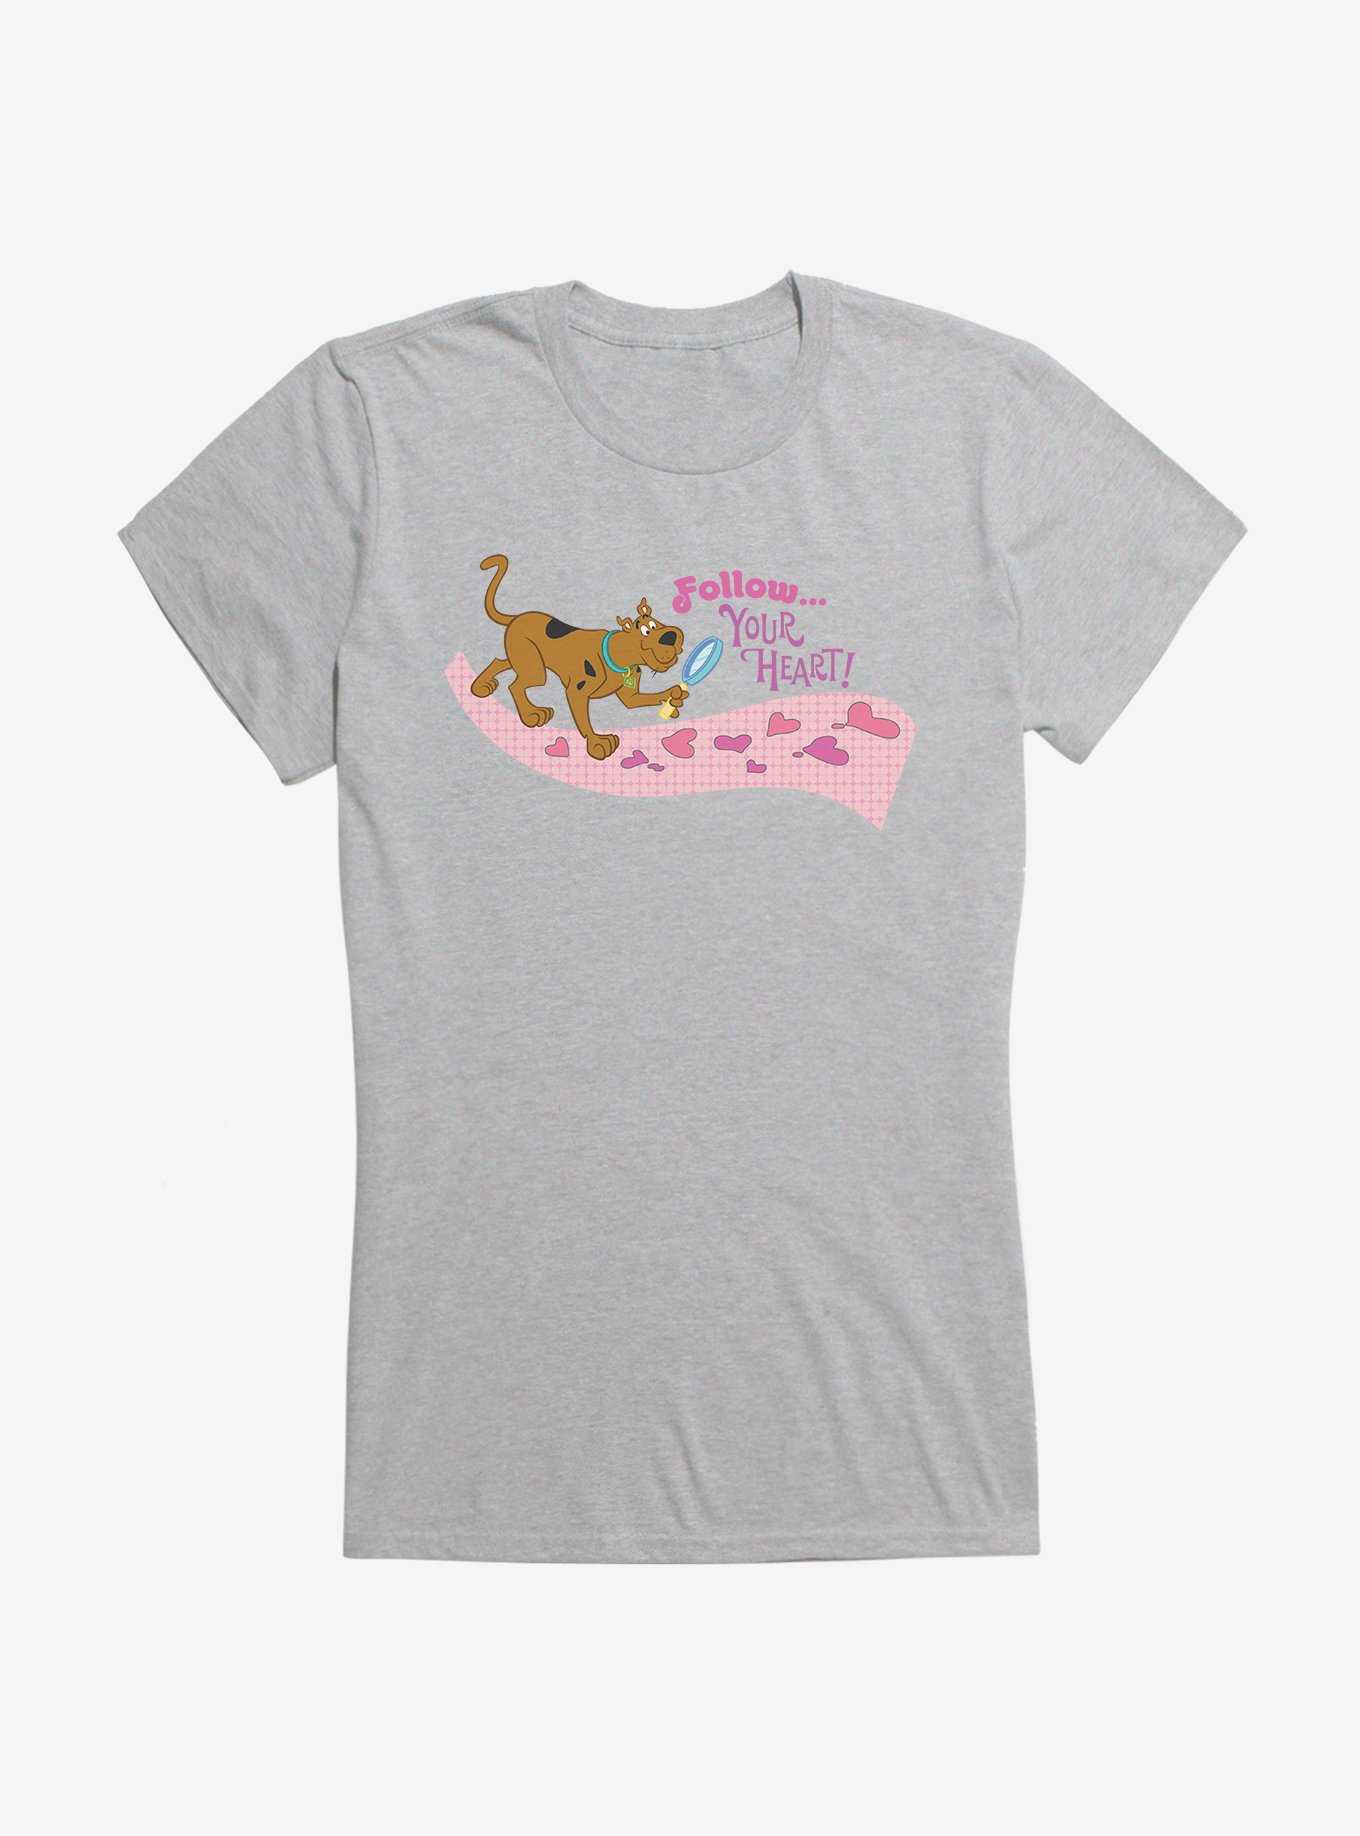 Scooby-Doo Valentines Follow Your Heart! Girls T-Shirt, HEATHER, hi-res